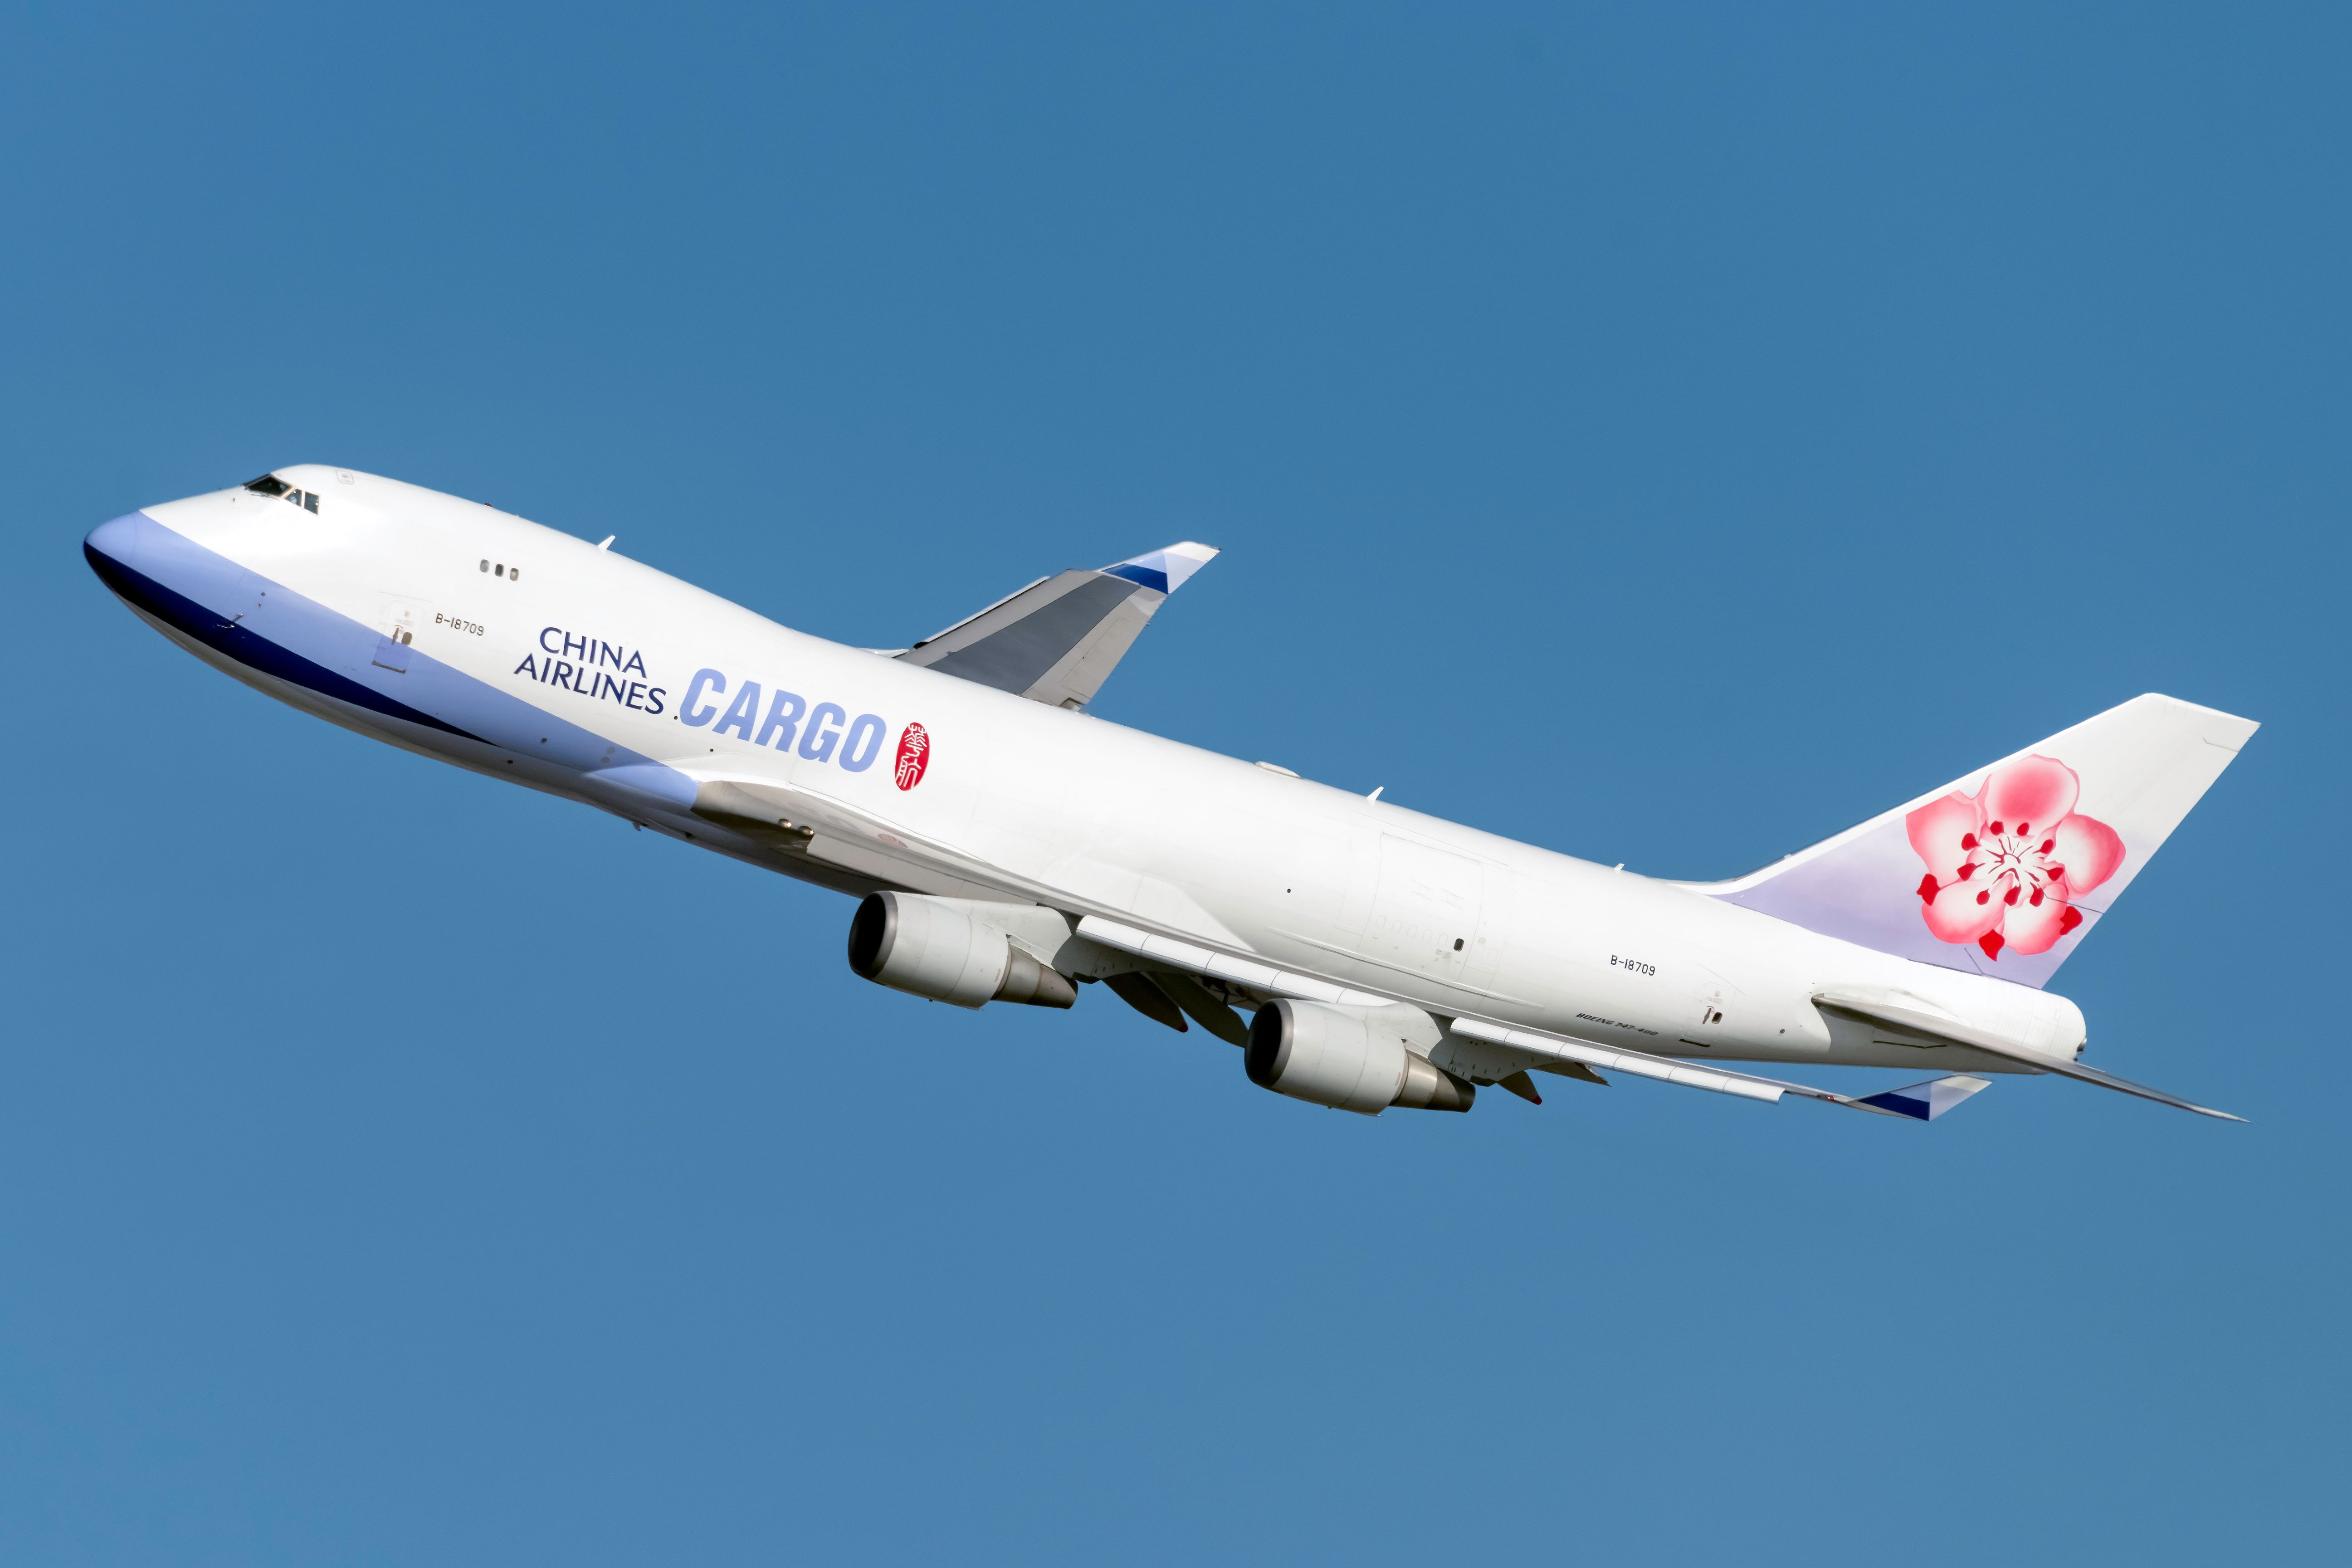 China Airlines Is Selling 5 Of Its Boeing 747-400 Freighters